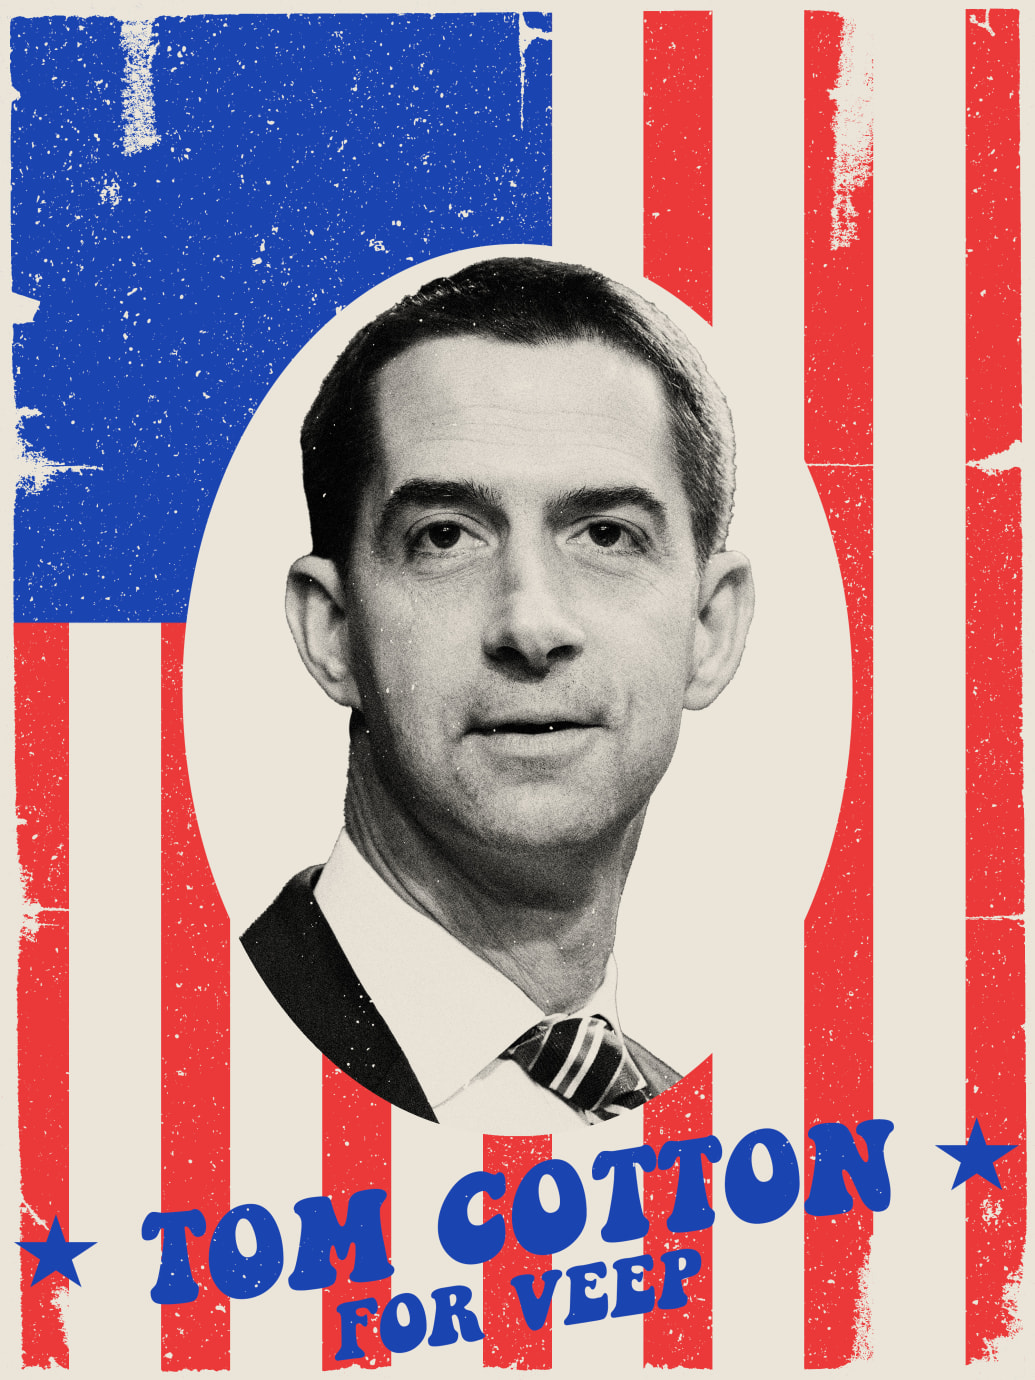 Vice Presidential campaign poster featuring Tom Cotton